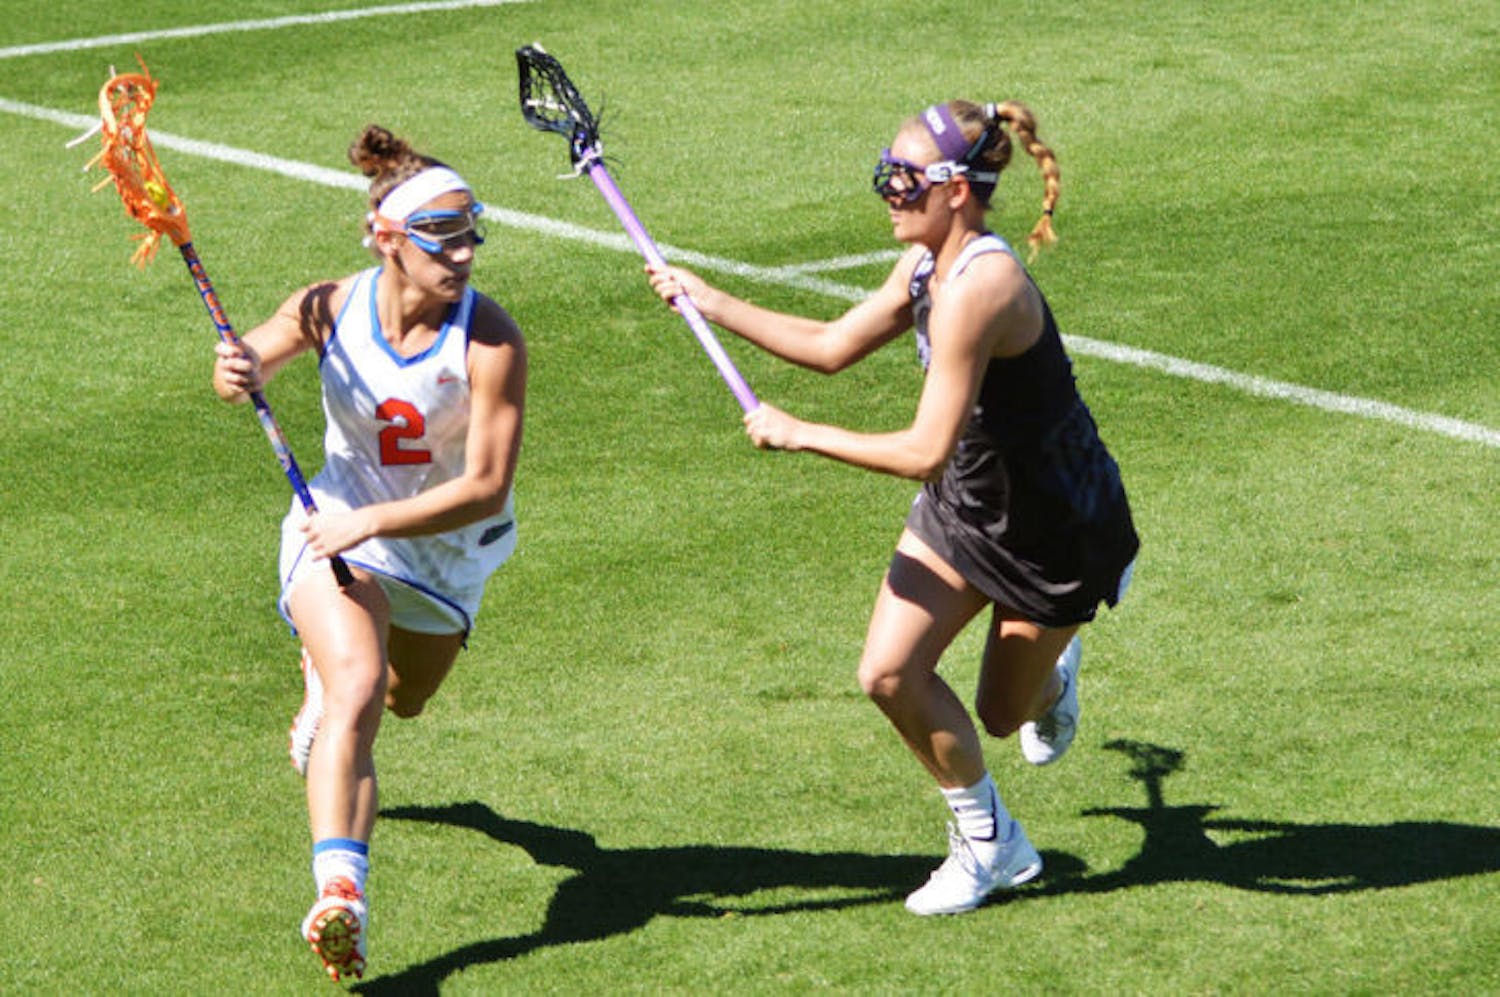 Sammi Burgess drives toward the net during Florida’s 18-7 win against High Point on Feb. 15 at Donald R. Dizney Stadium. The freshman attacker finished second on the team with 53 points.